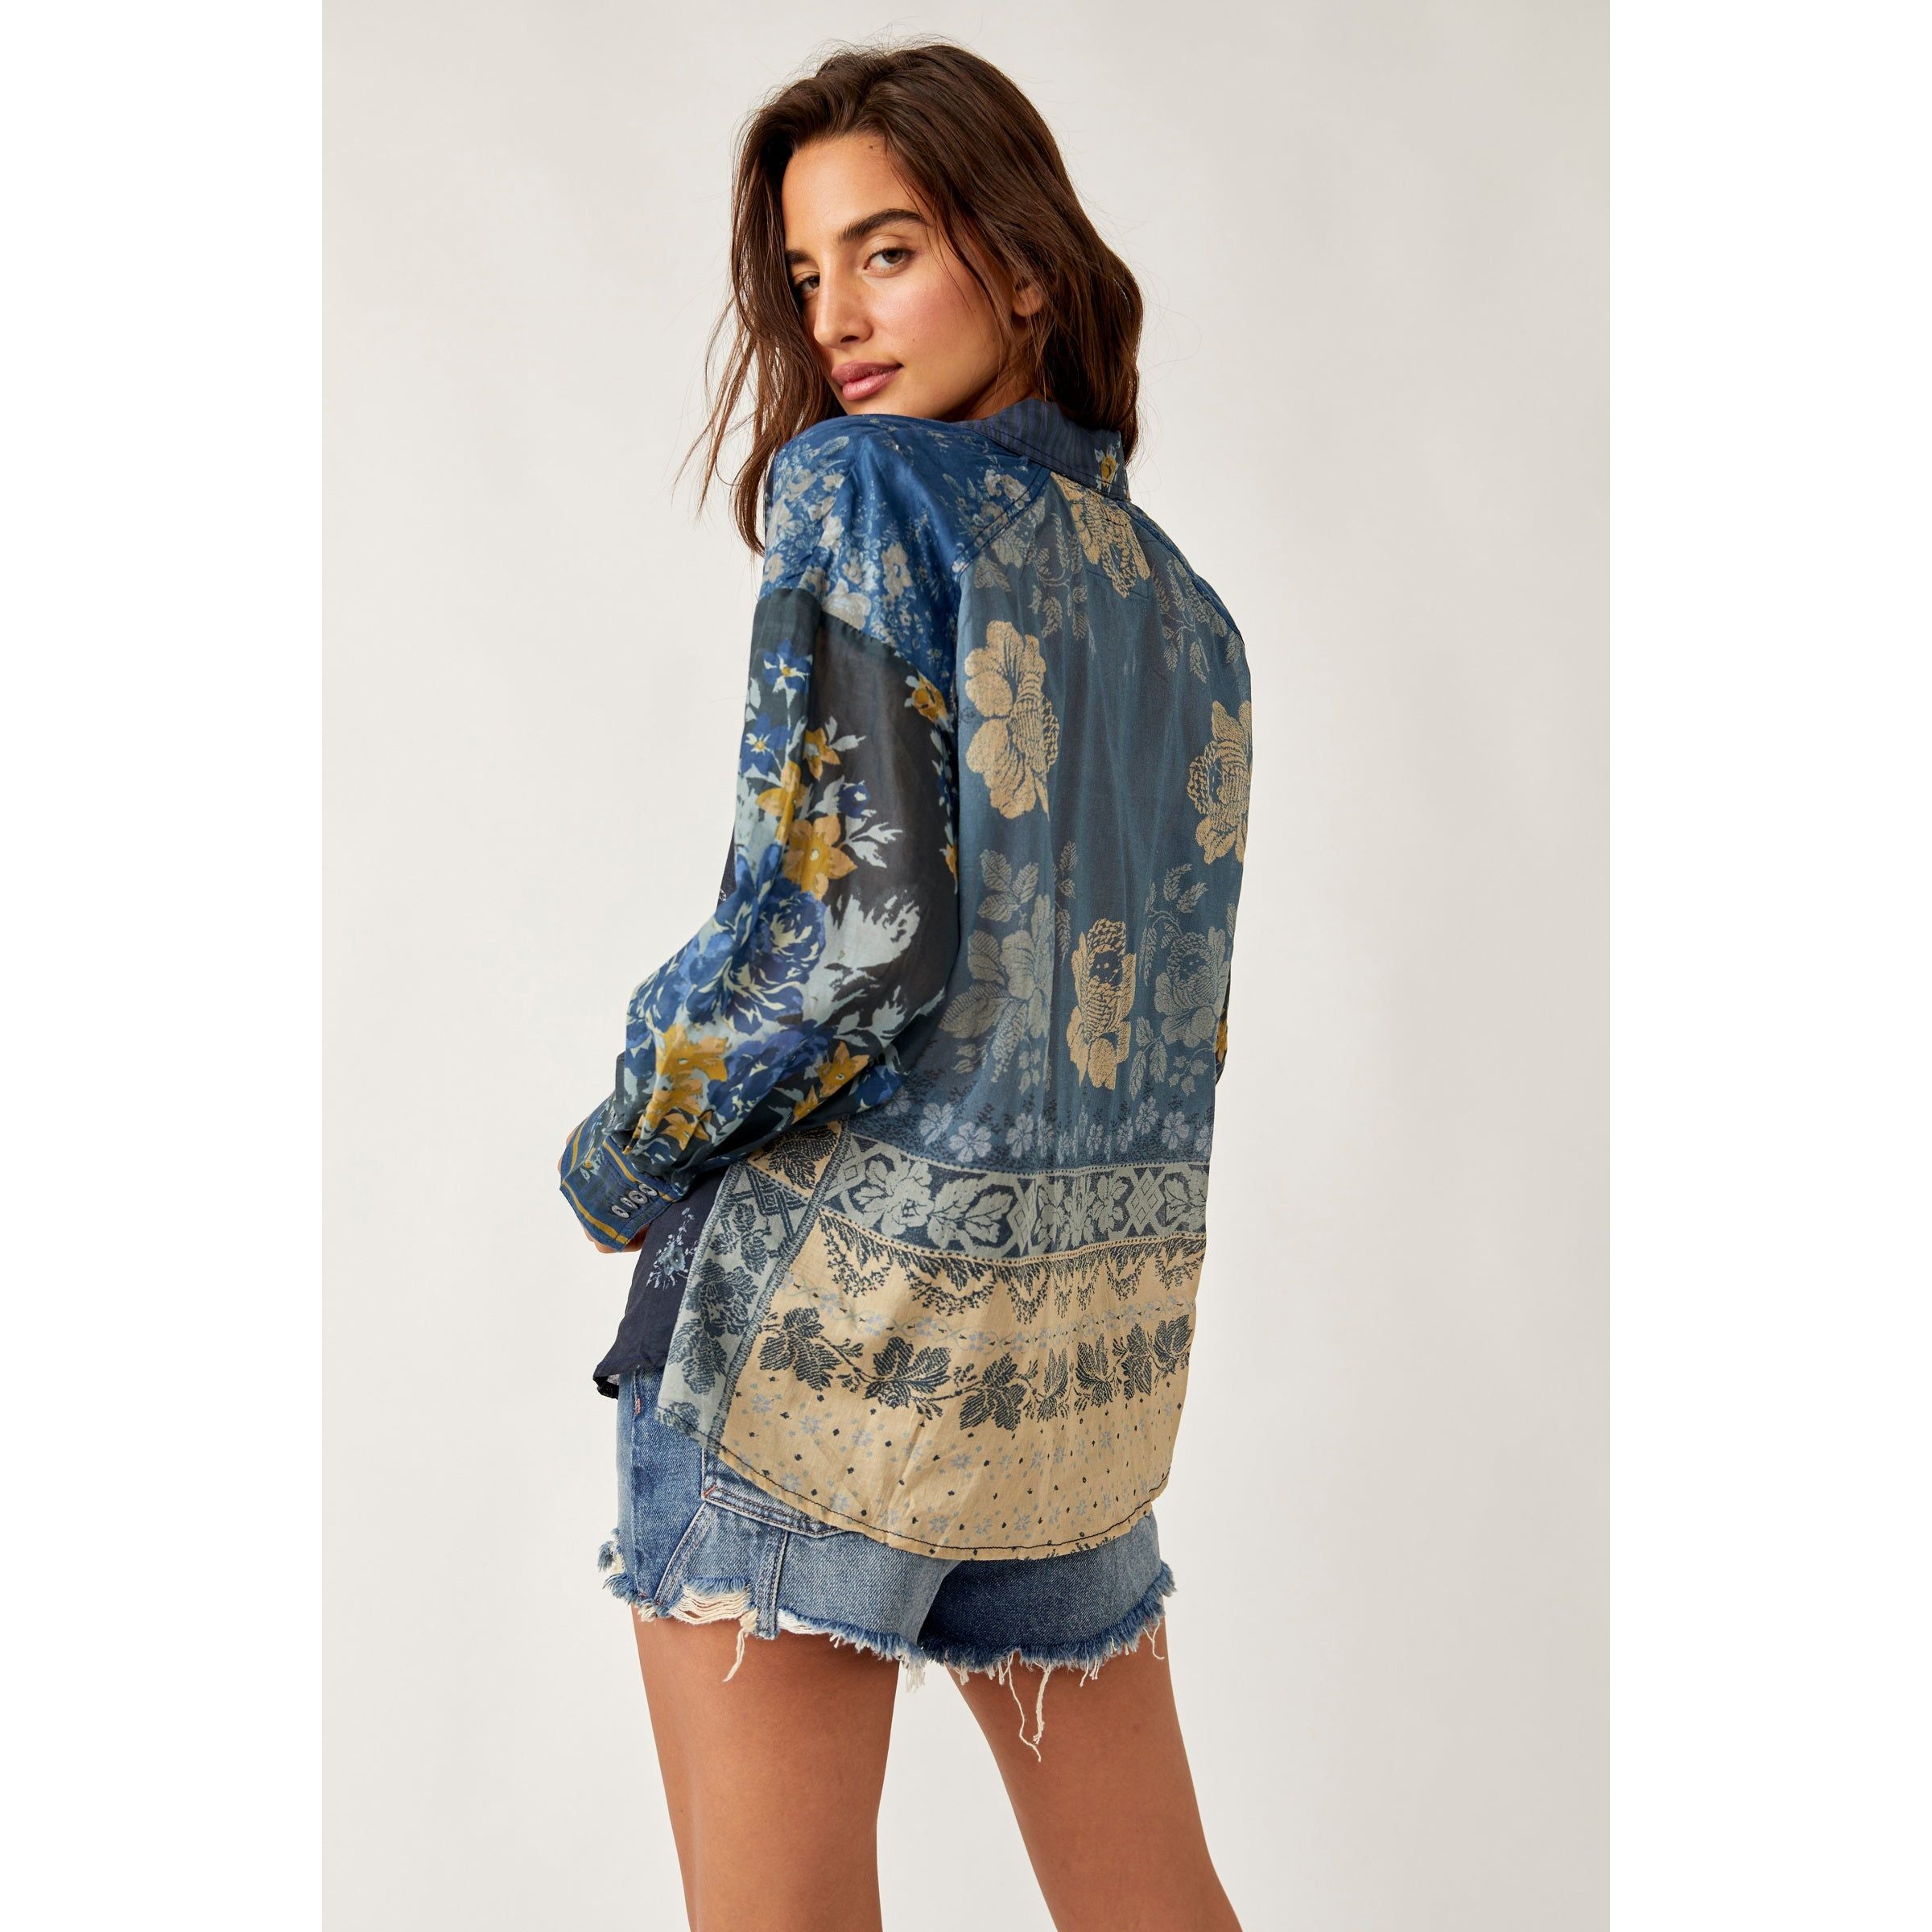 Free People - Flower Patch Top in Indigo Combo